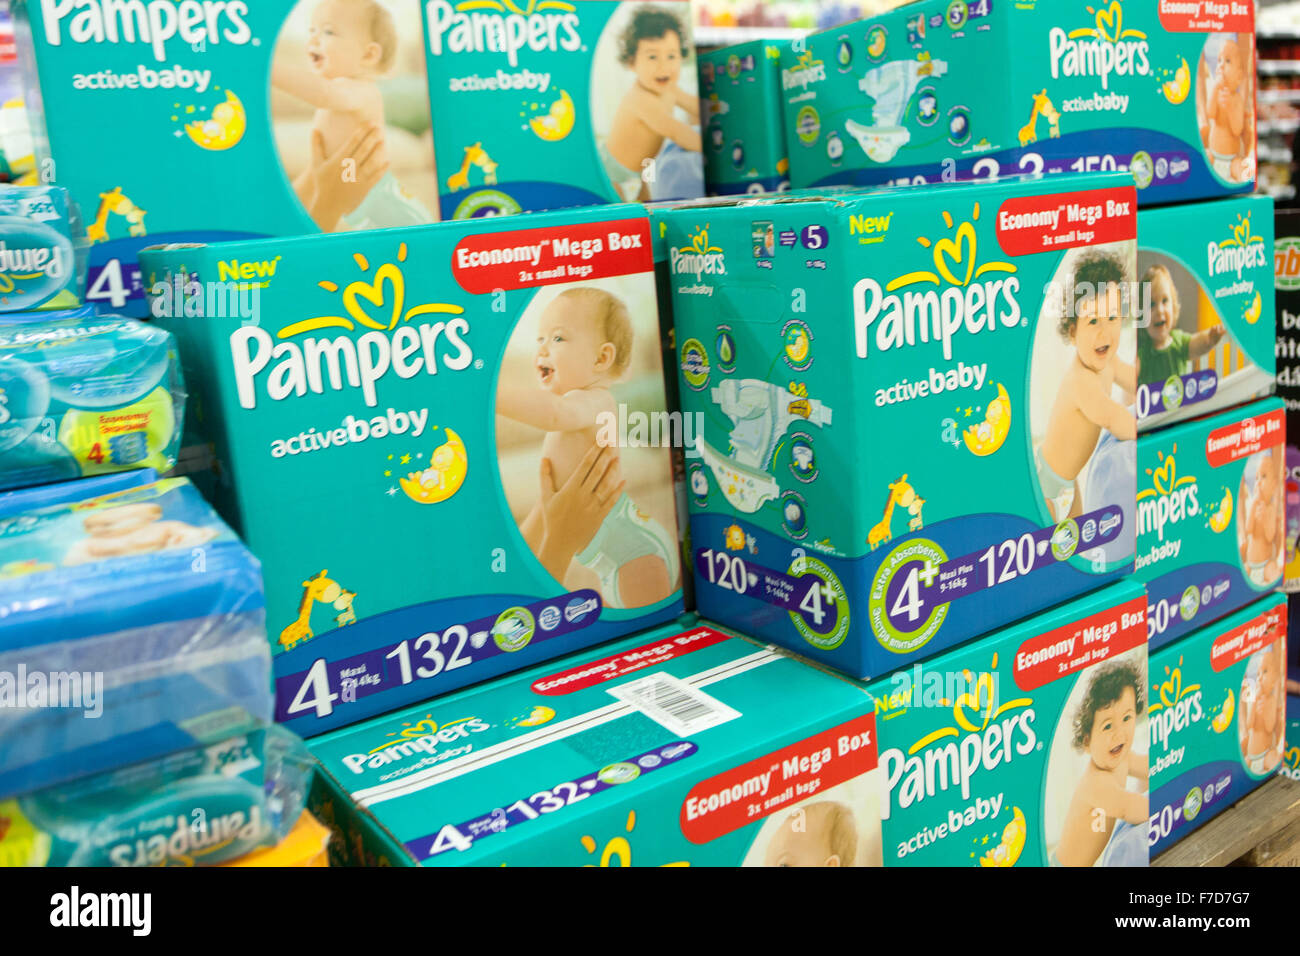 Pampers Stock Up Nappy Pants Bundle Size 7 - ASDA Groceries